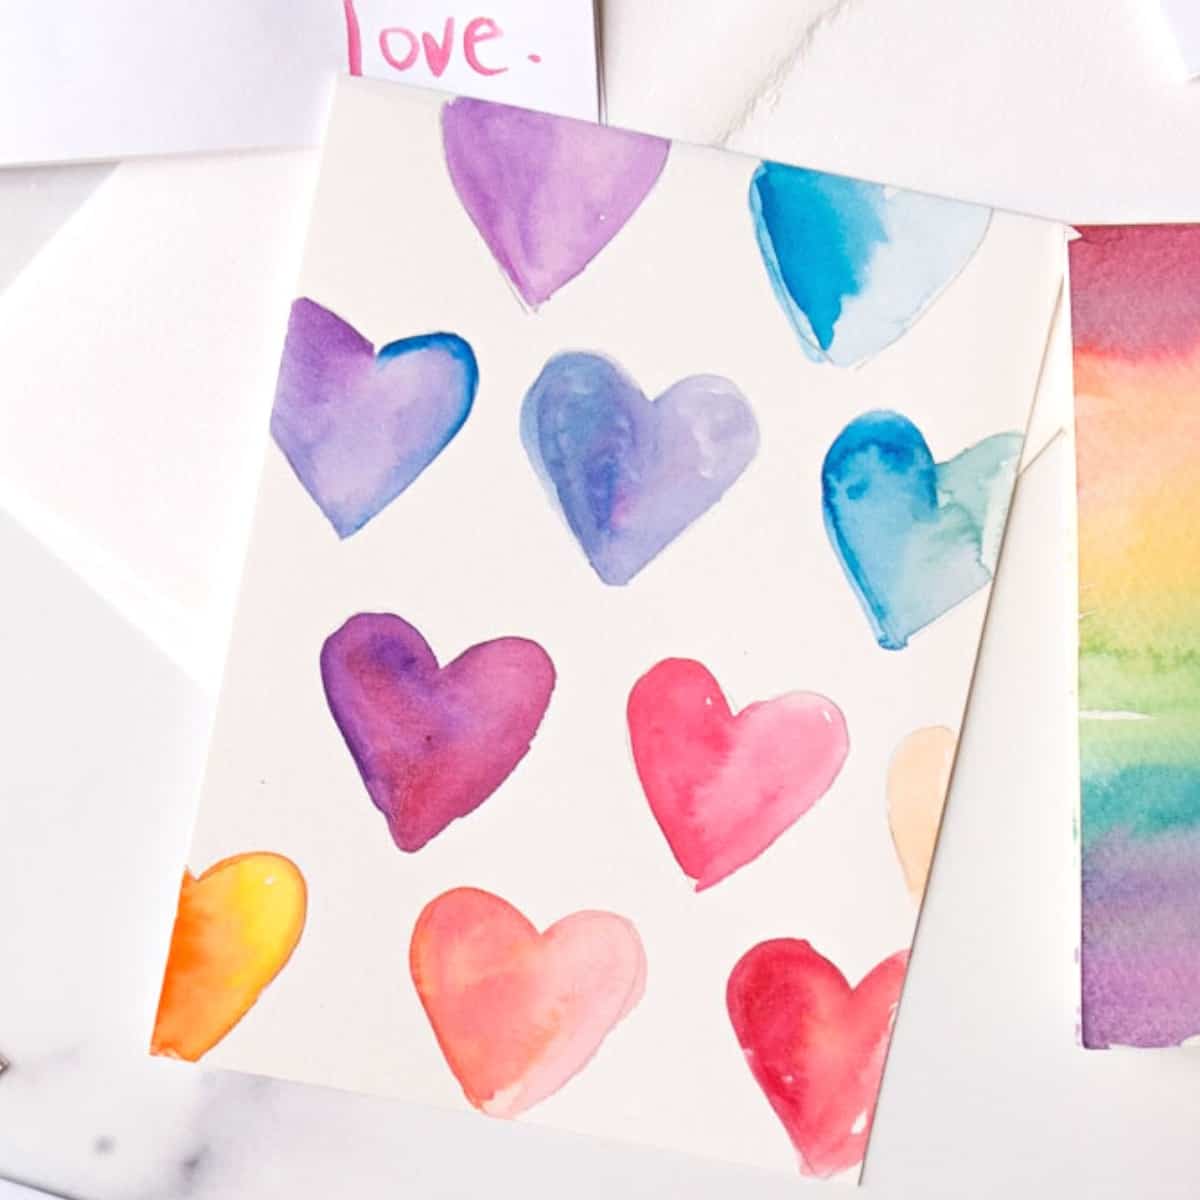 Water color heart painting.